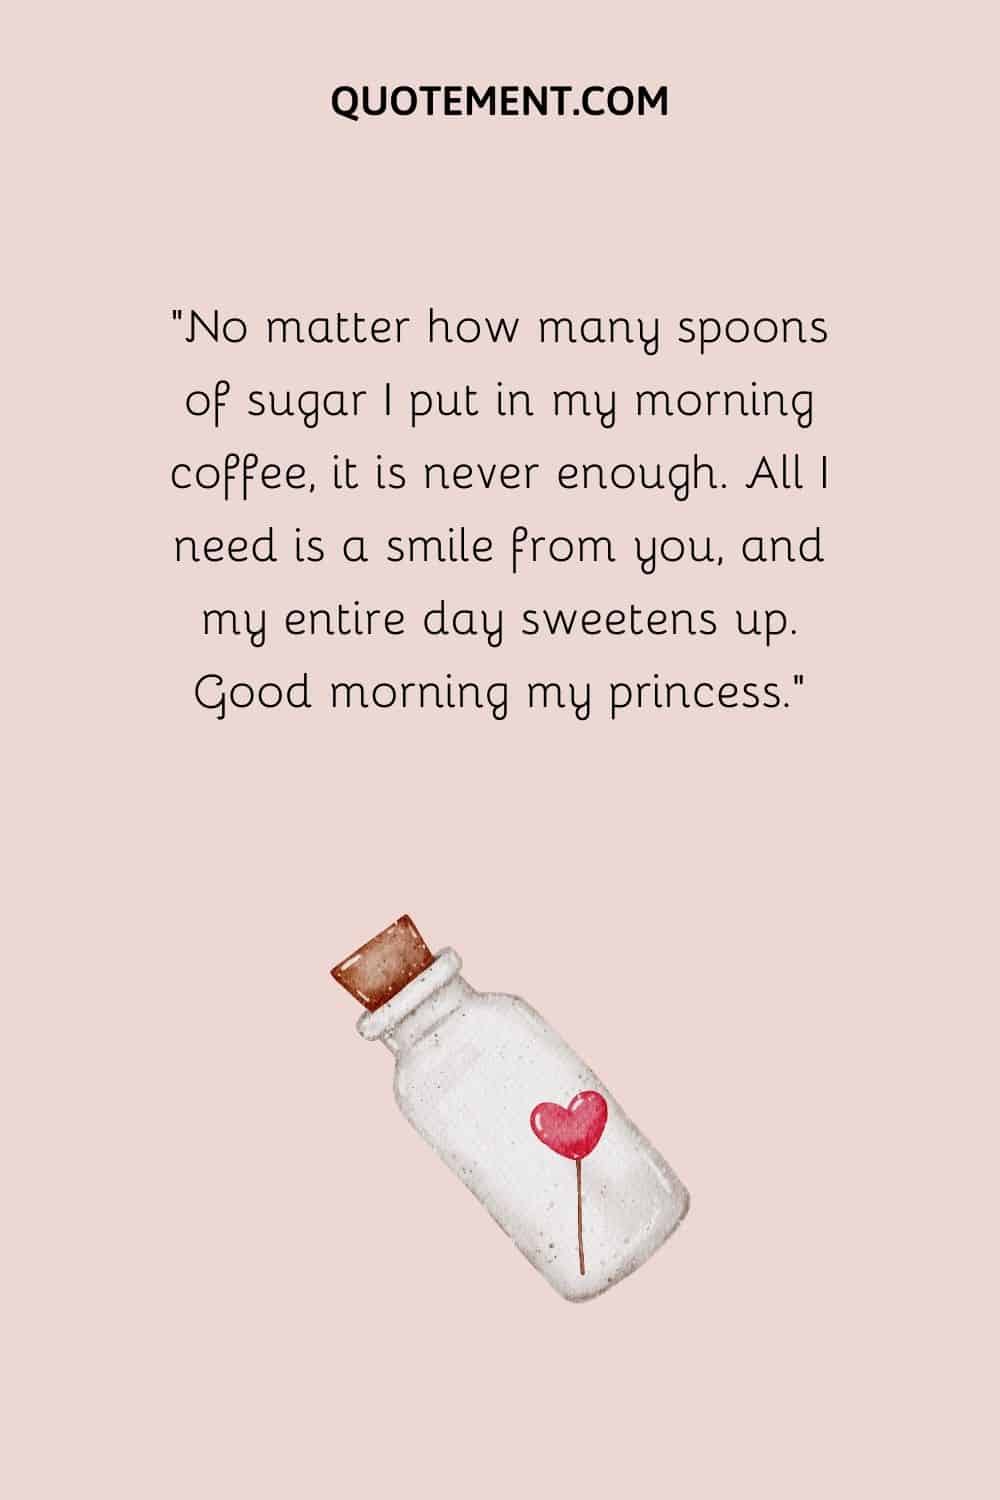 No matter how many spoons of sugar I put in my morning coffee, it is never enough. All I need is a smile from you, and my entire day sweetens up. Good morning my princess.